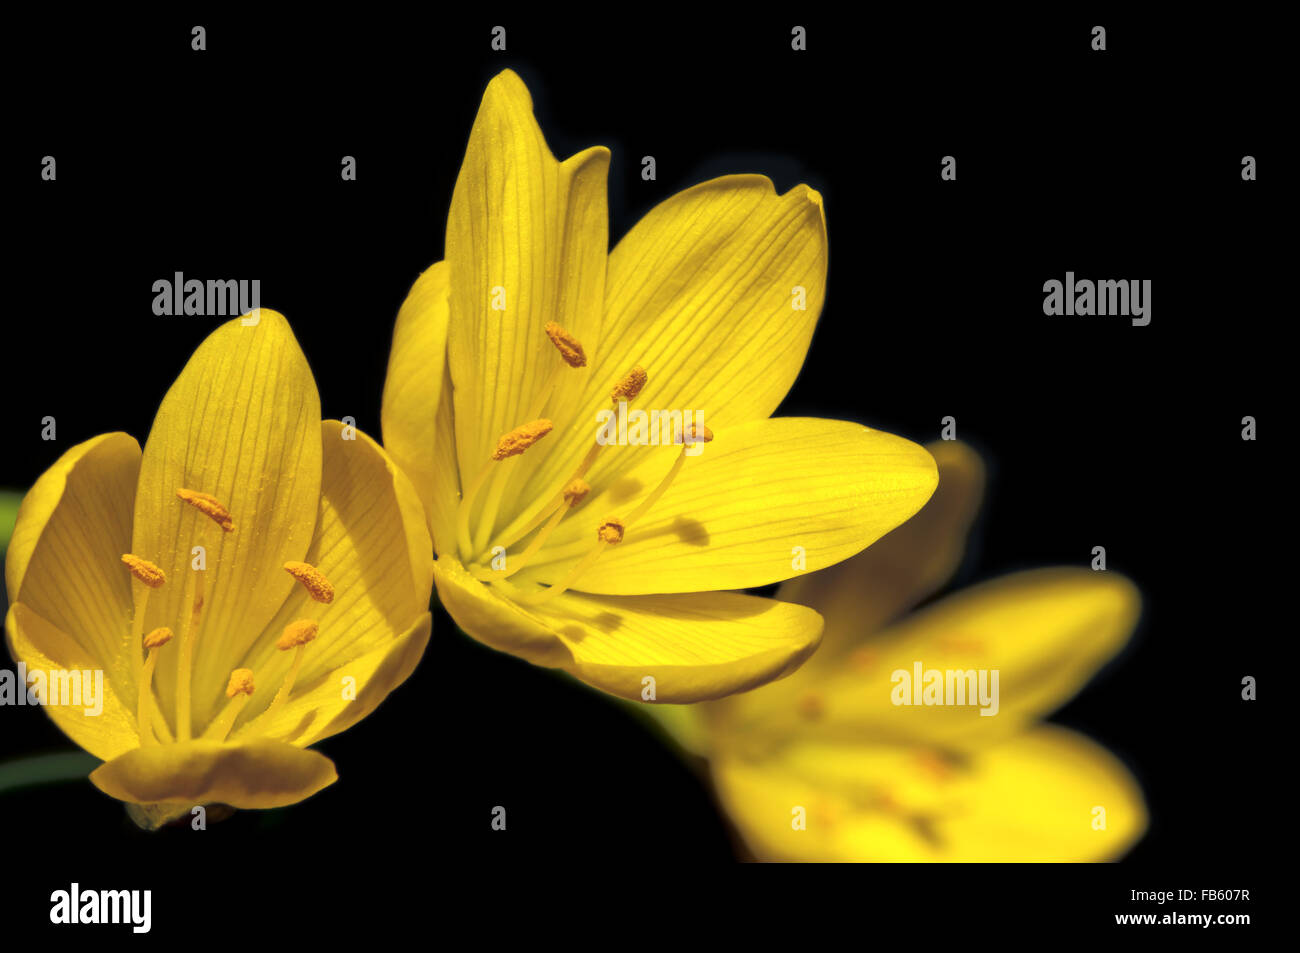 flowers of sternbergia lutea on black background Stock Photo